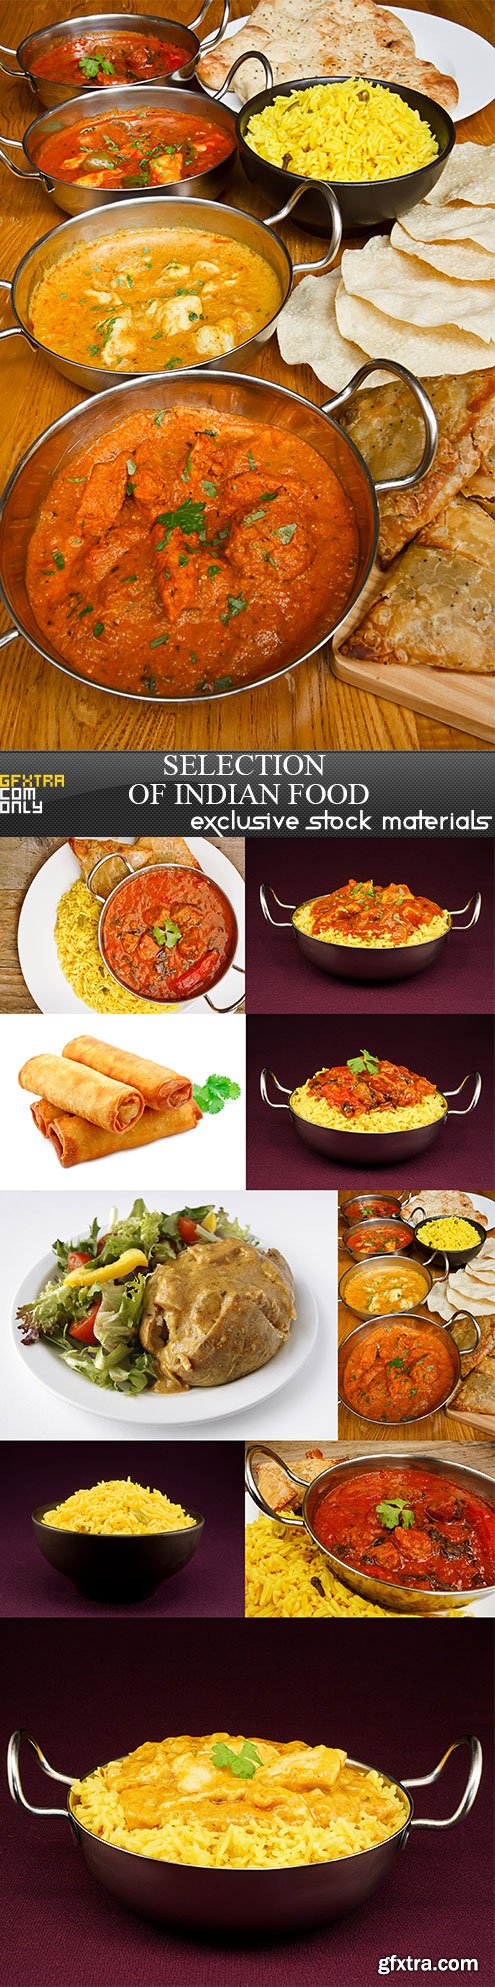 Selection of Indian Food, 9xJPG